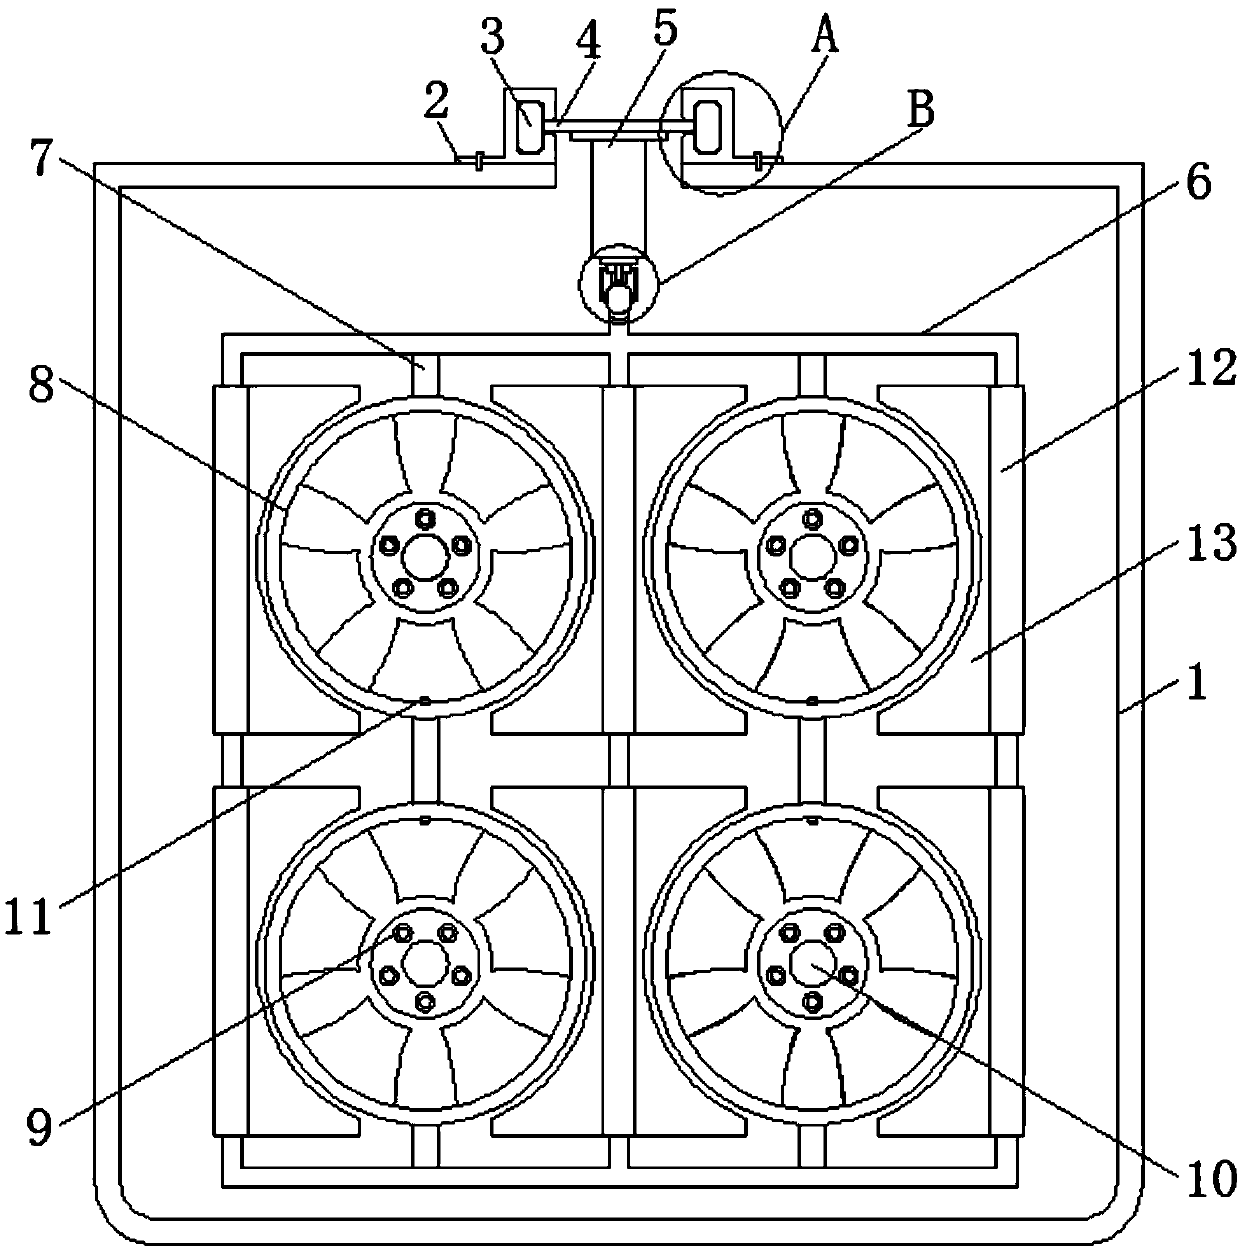 Aluminum alloy hub heat treatment device capable of effectively improving yield of hubs